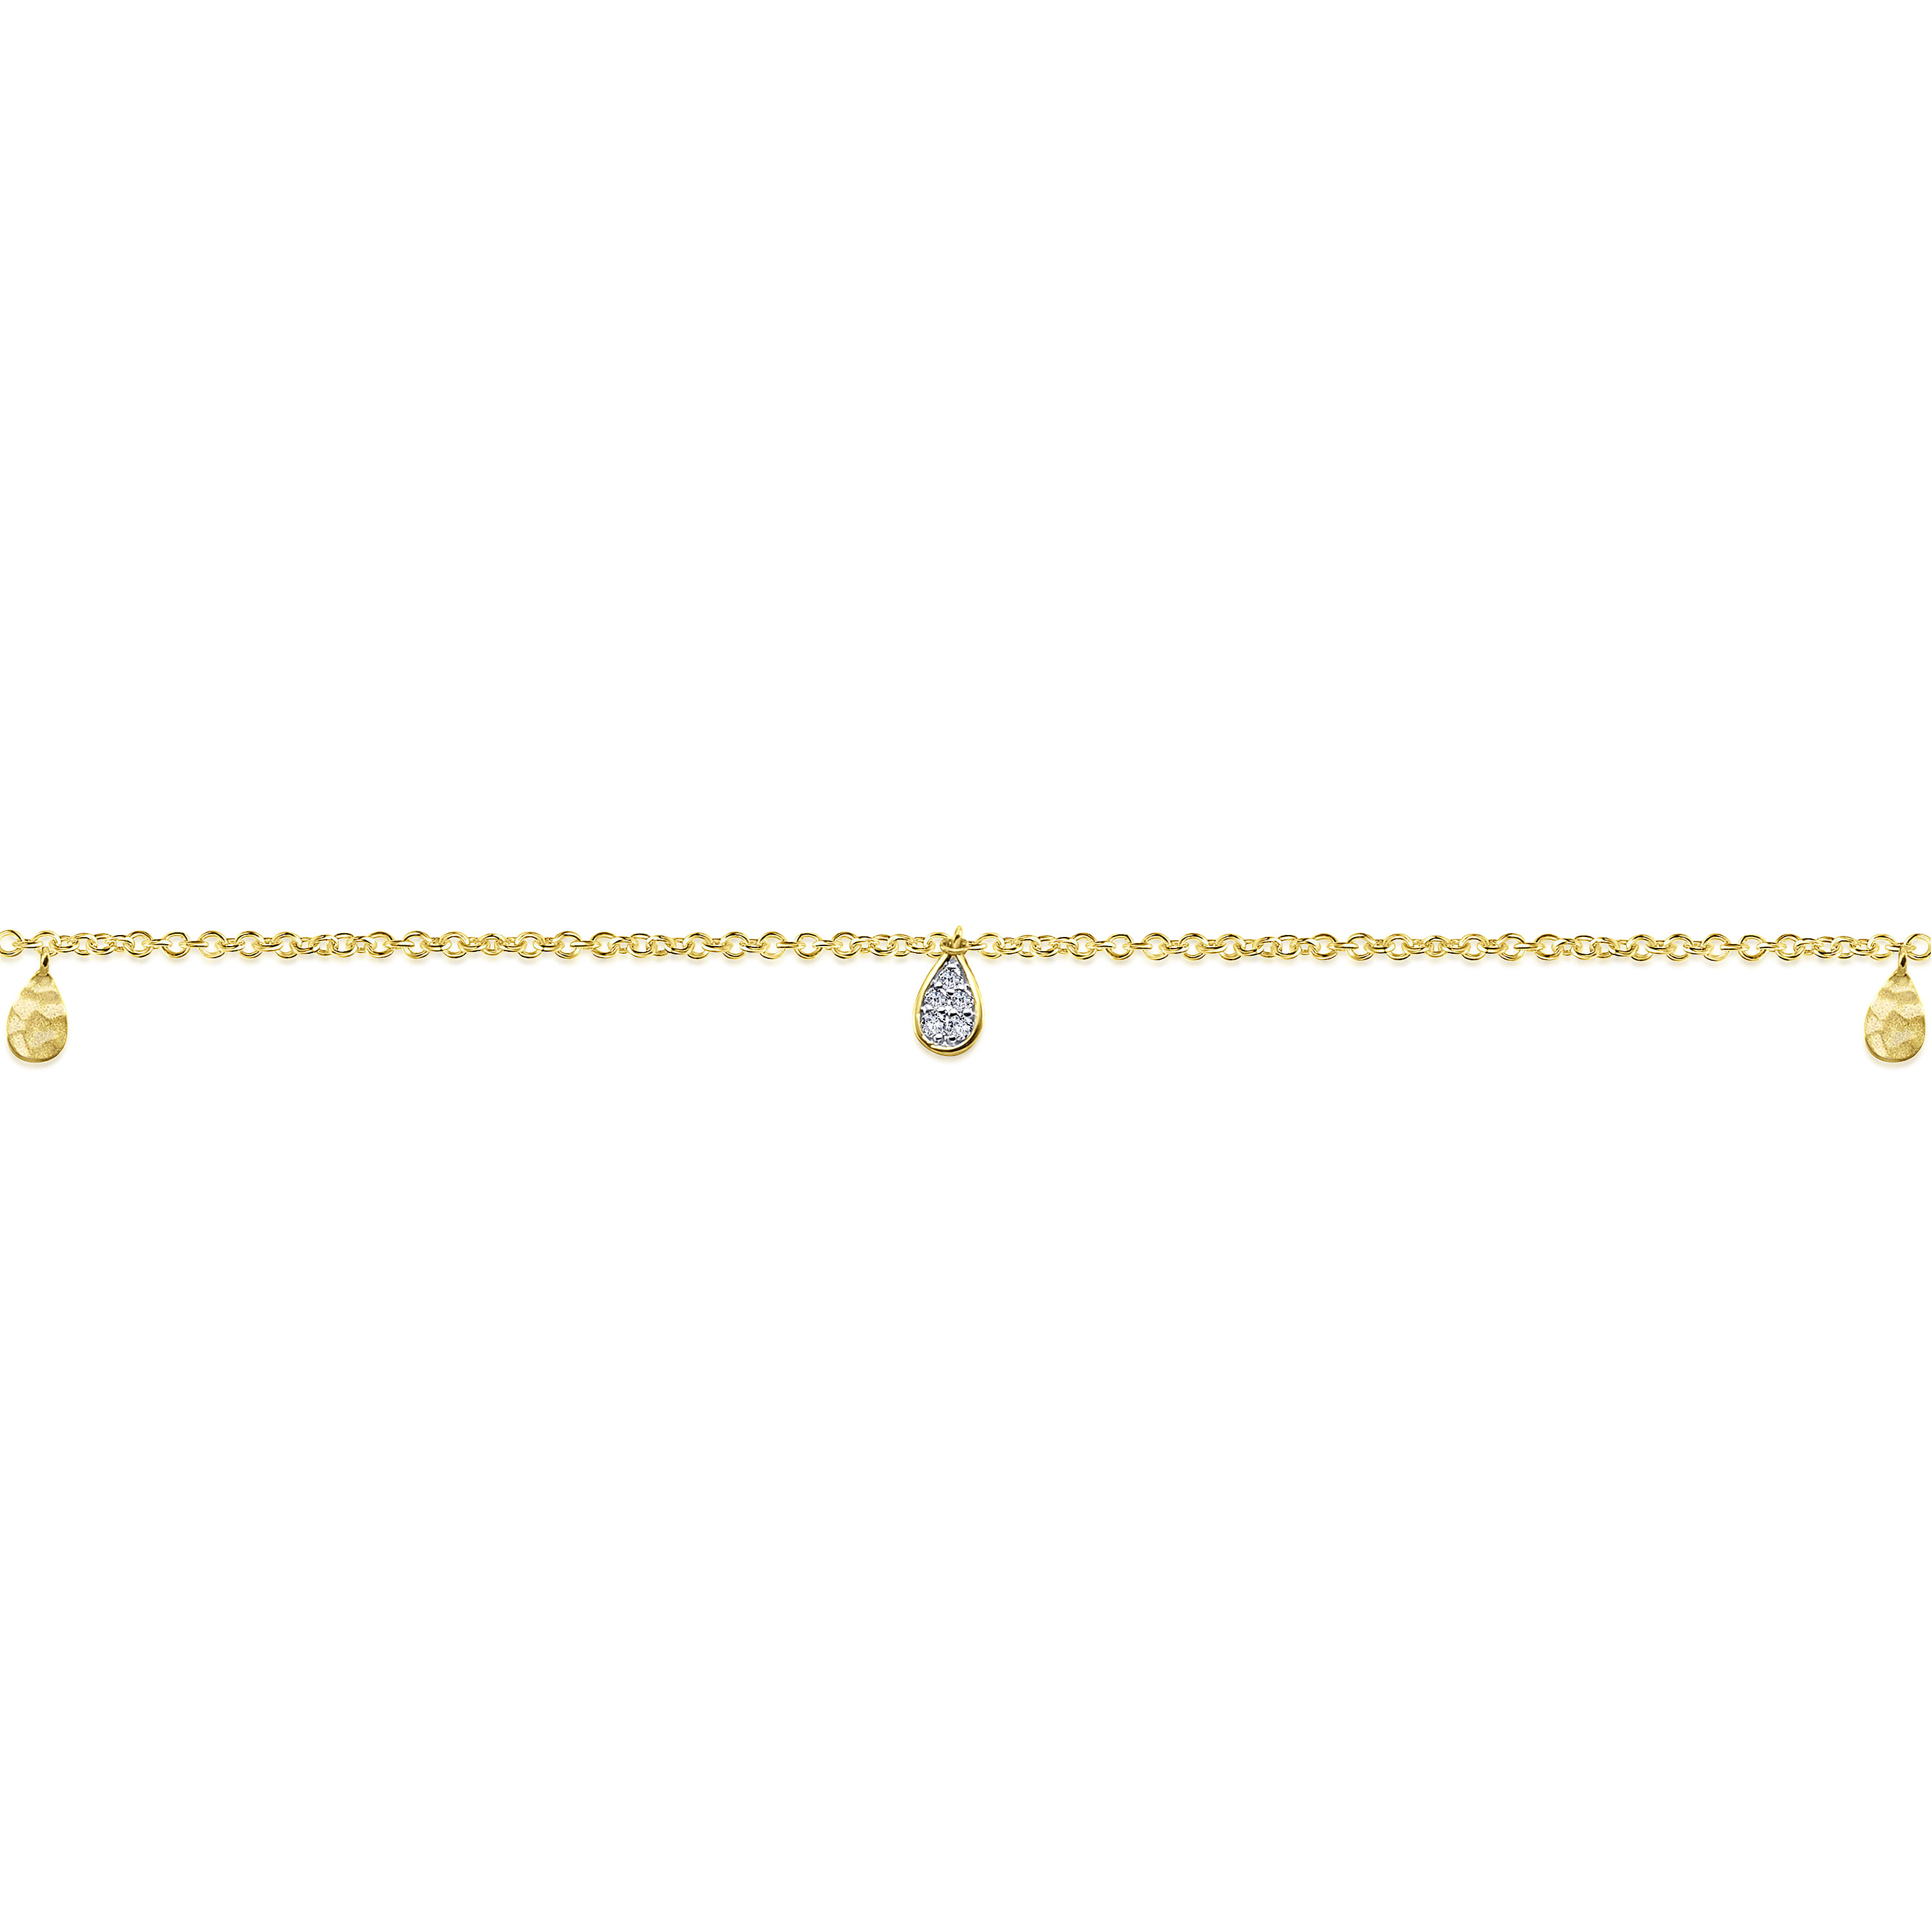 14K Yellow Gold Chain Bracelet with Hammered and Diamond Teardrops